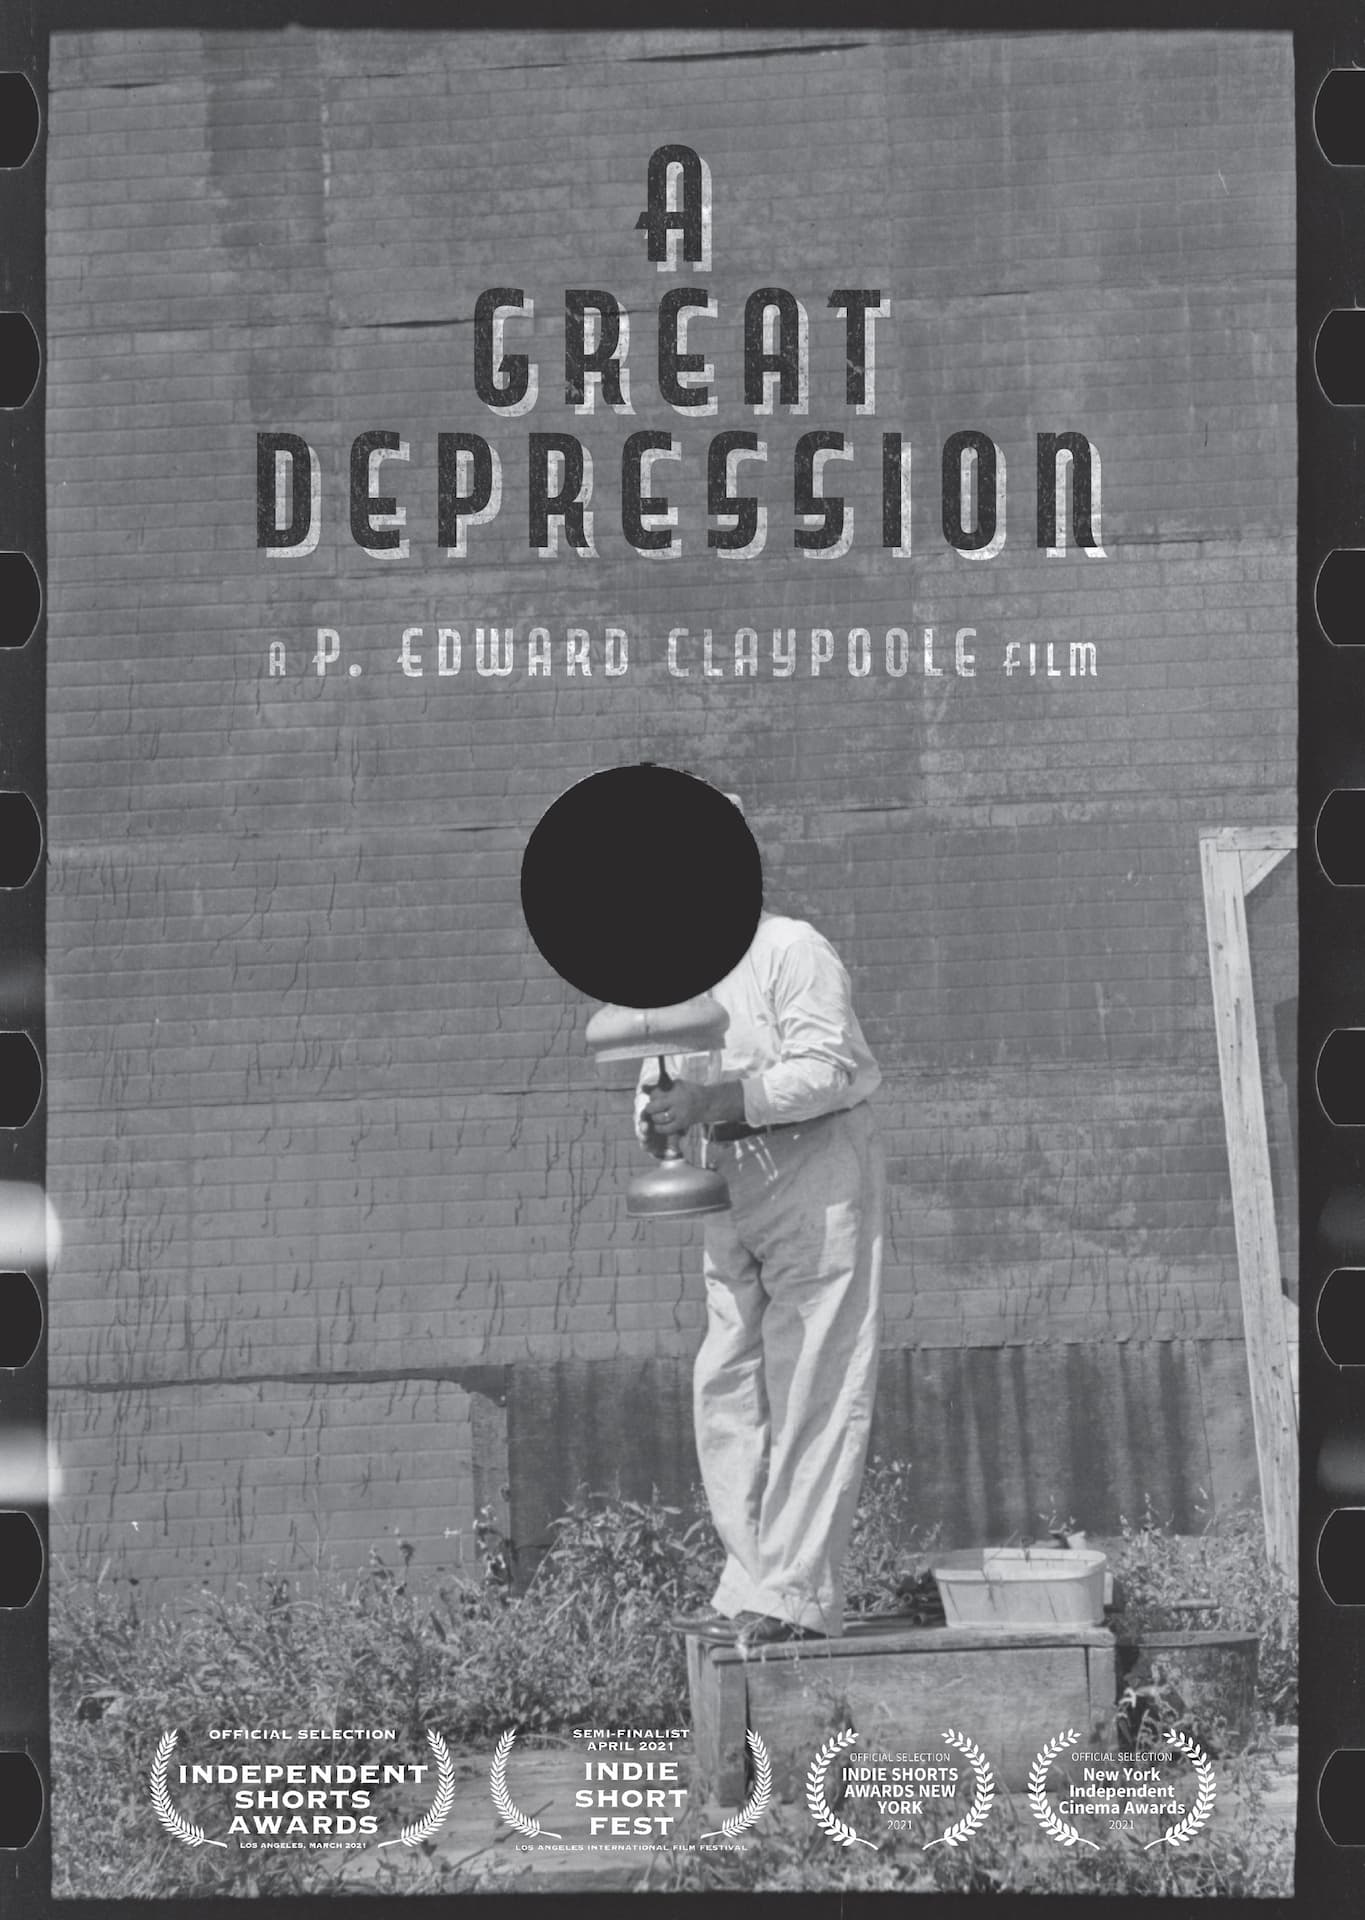 A Great Depression